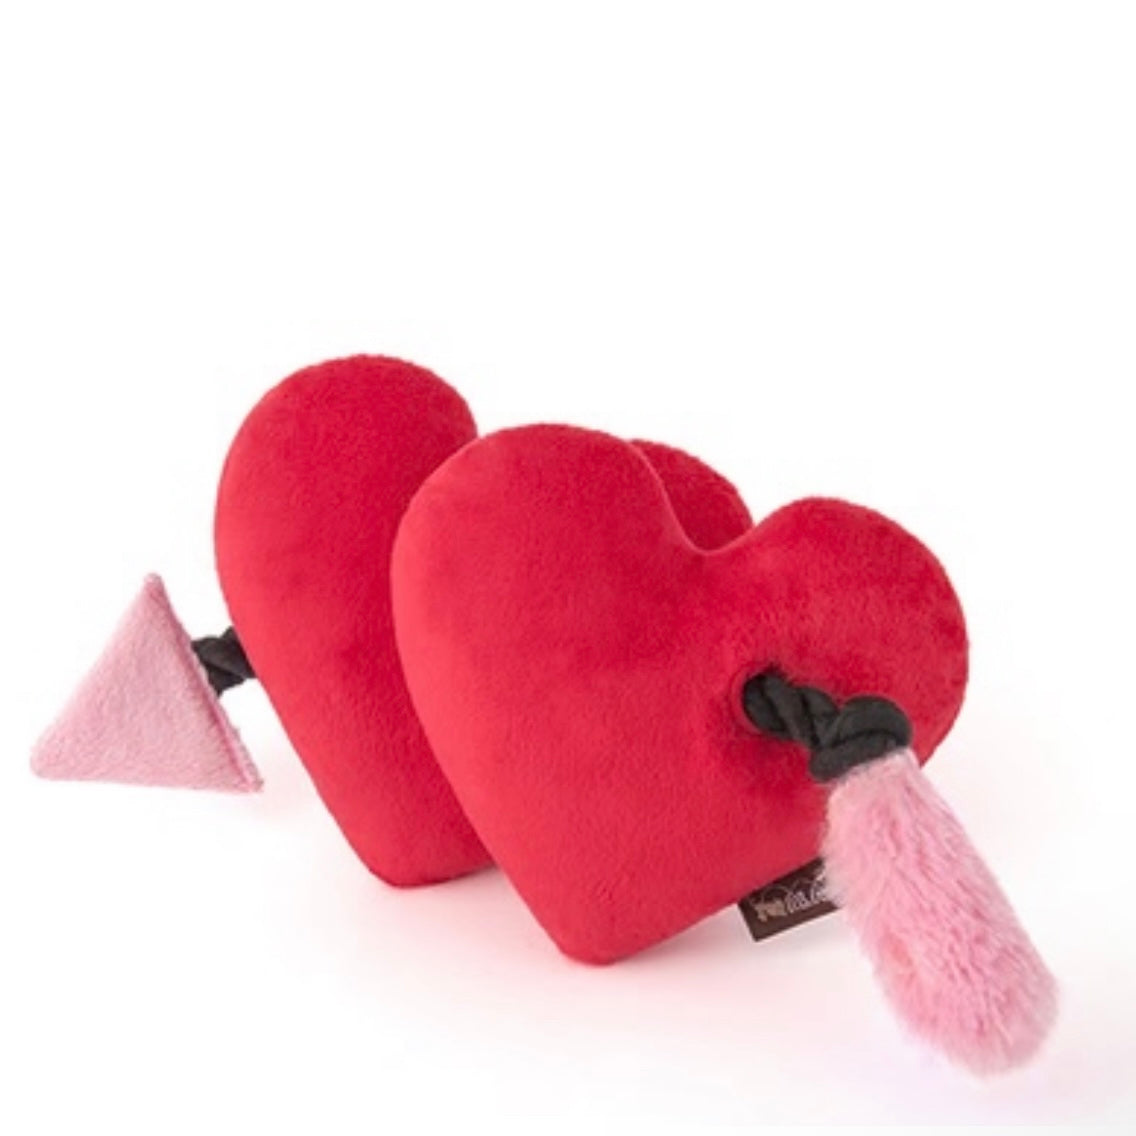 Fur-ever Hearts Squeaky Plush Toy